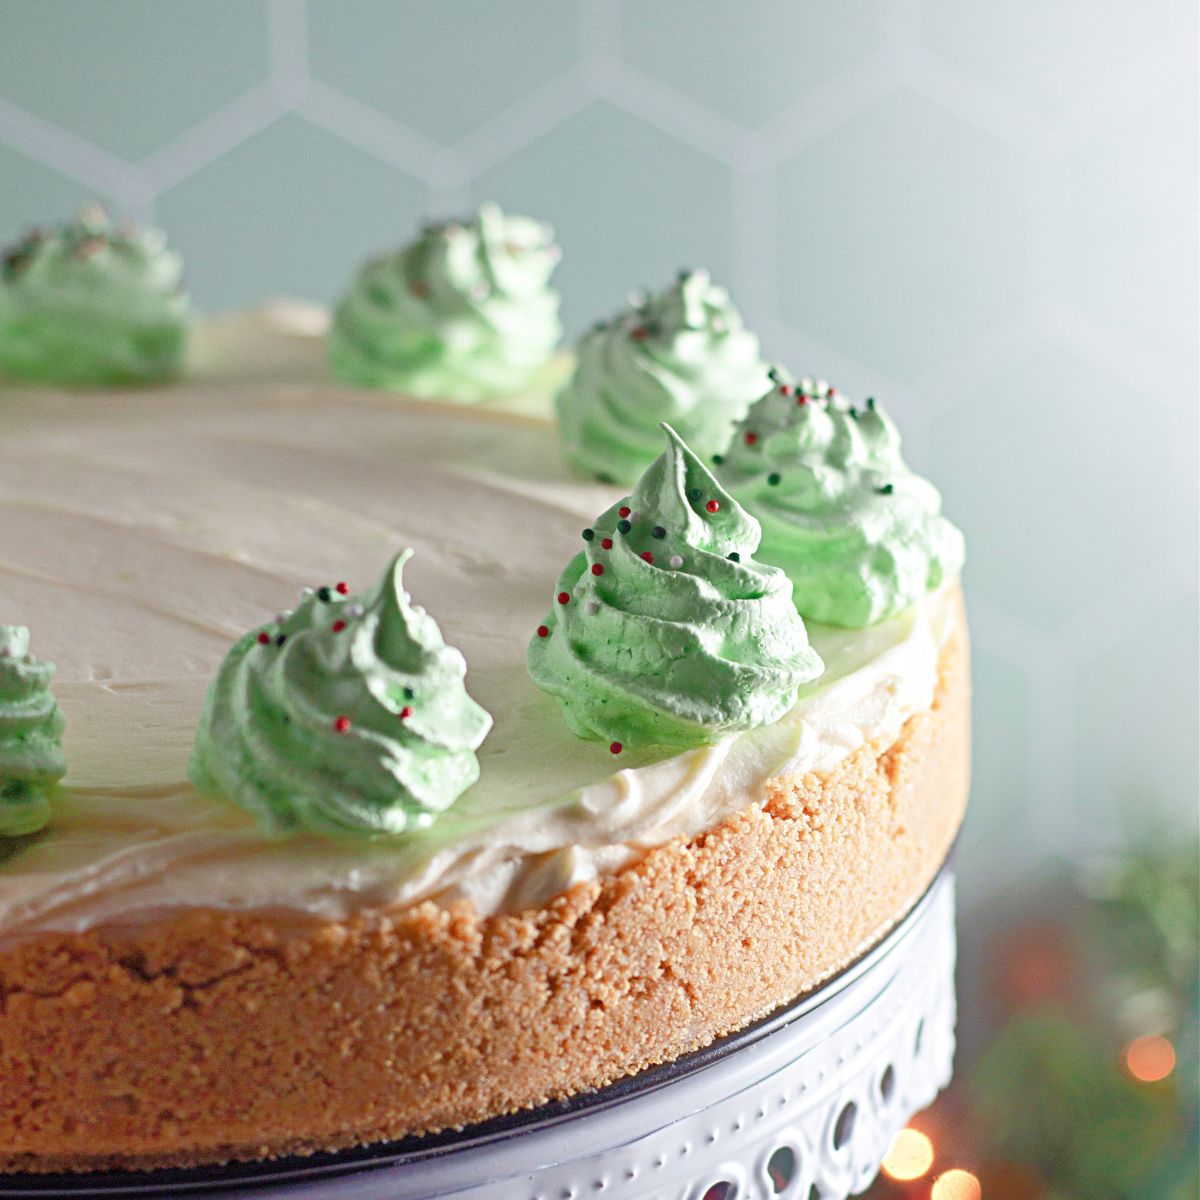 A green frosted cake on a cake stand.